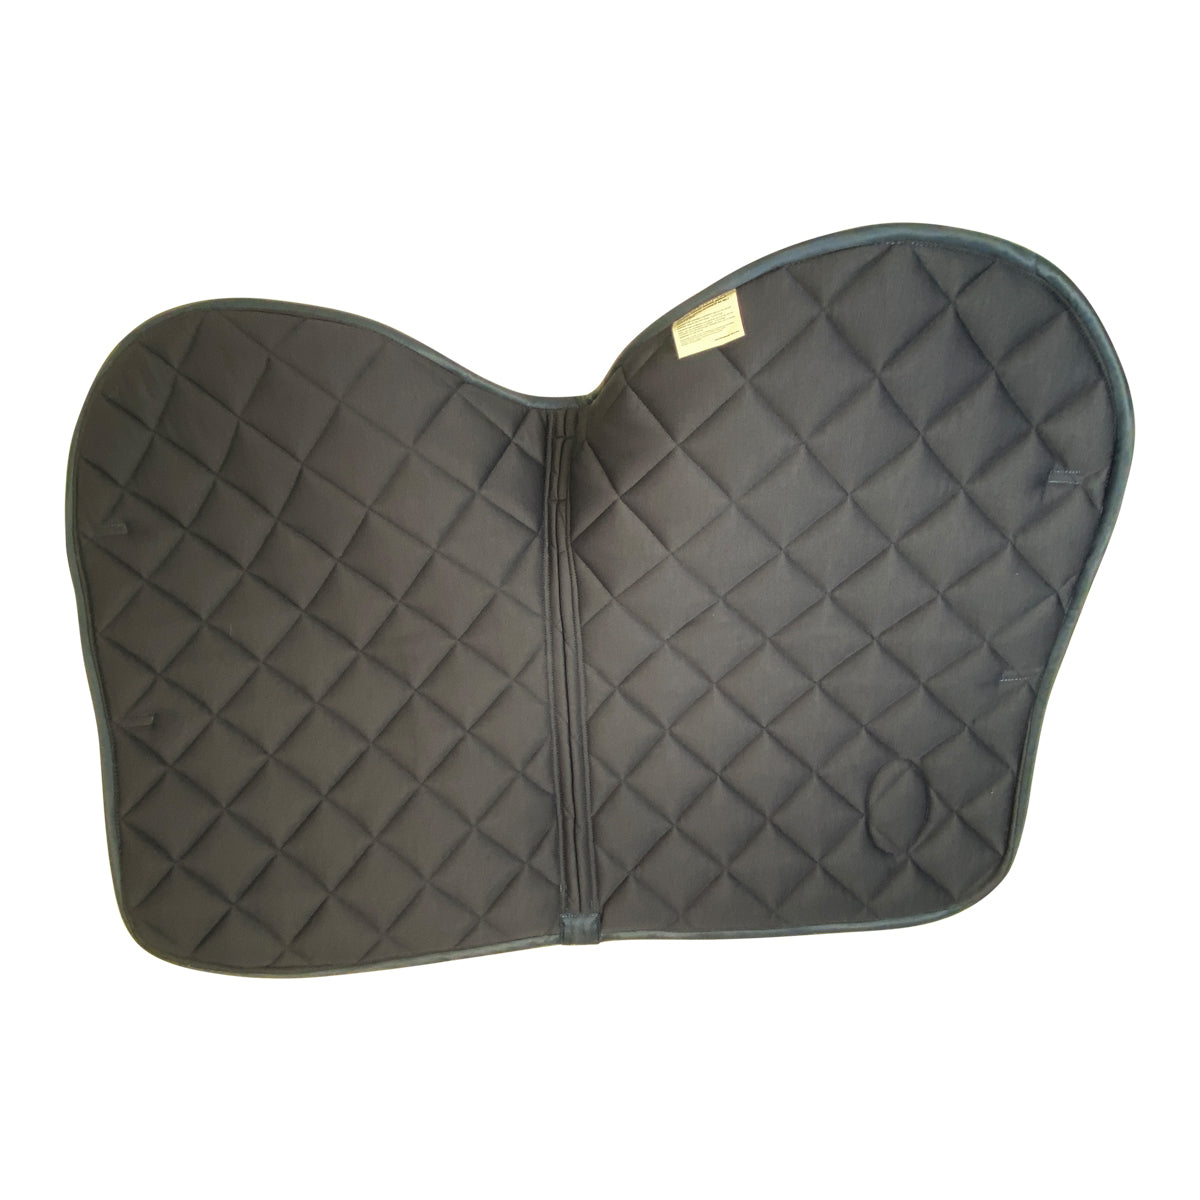 Jump'In 'Training Jumpad' Saddle Pad in Navy w/Brown Piping